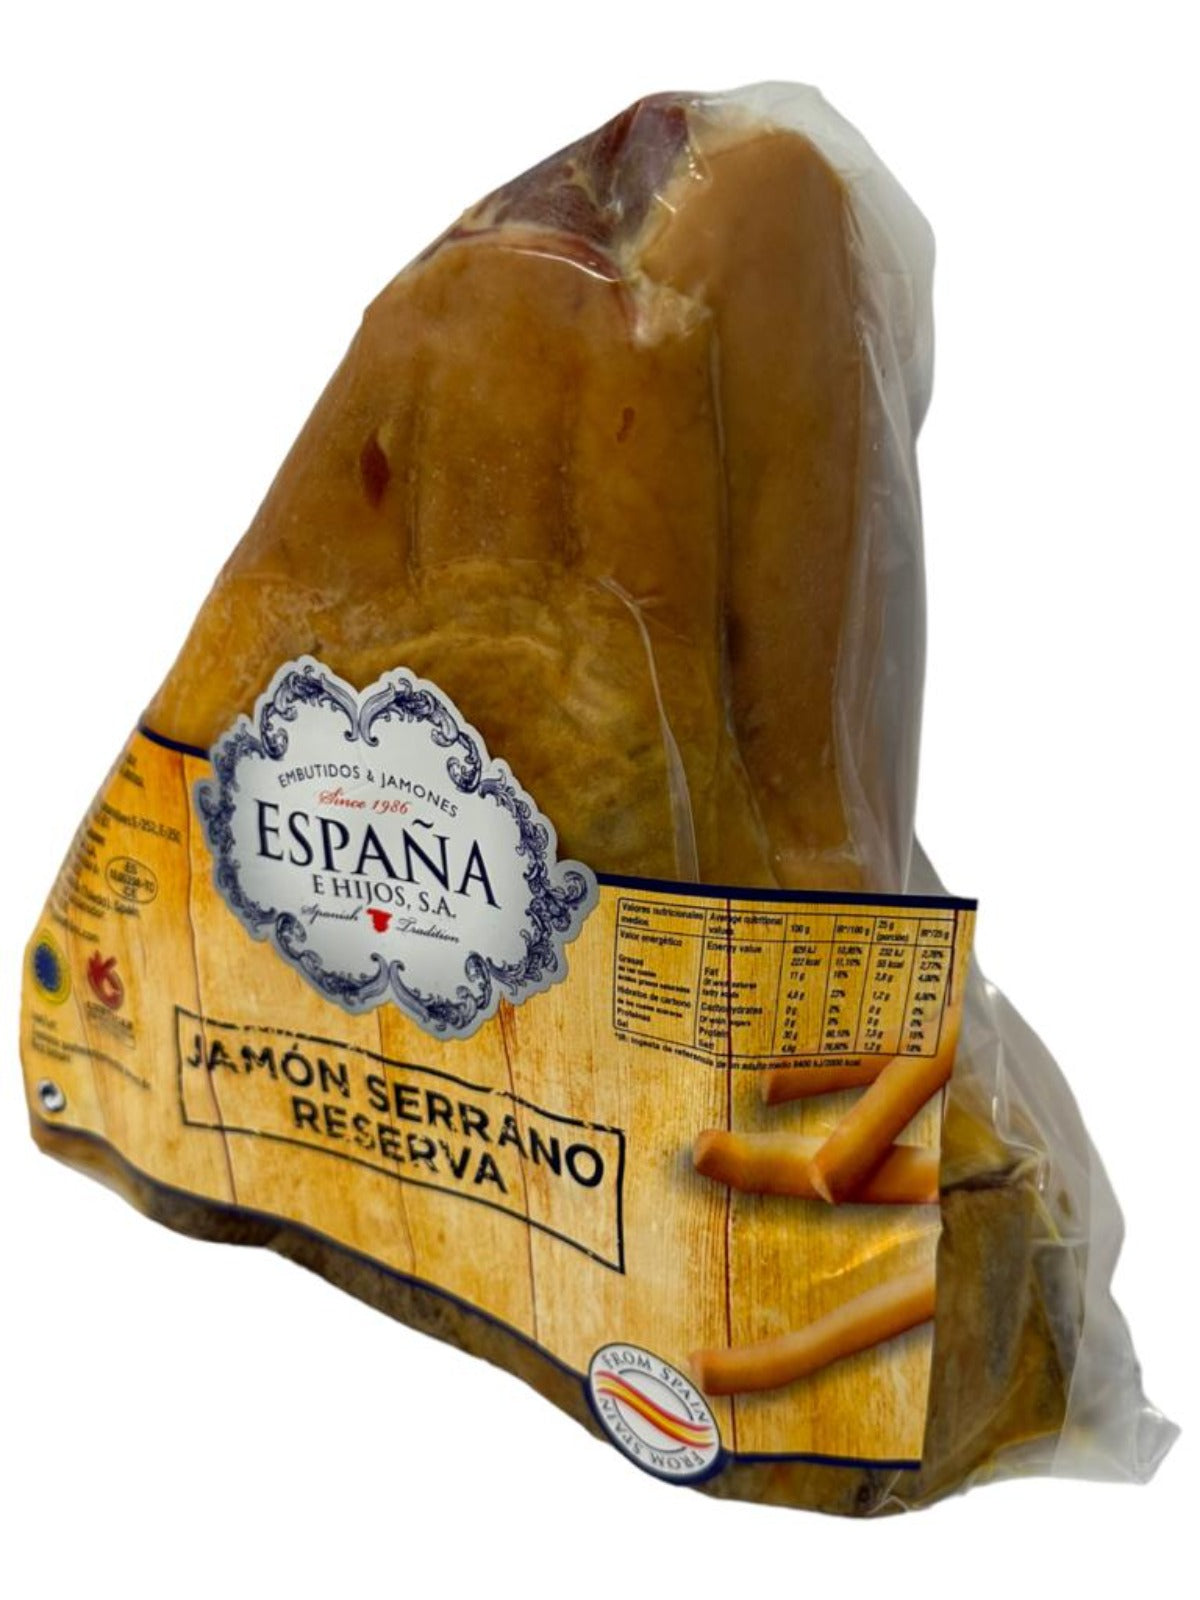 Espana y Hijos Jamon Serrano Half Leg random weight approx. 2kg packet. Regular price $75.00 [You are guaranteed to receive at least 1.950kg of product, equivalent price of $38.46 per kg.]